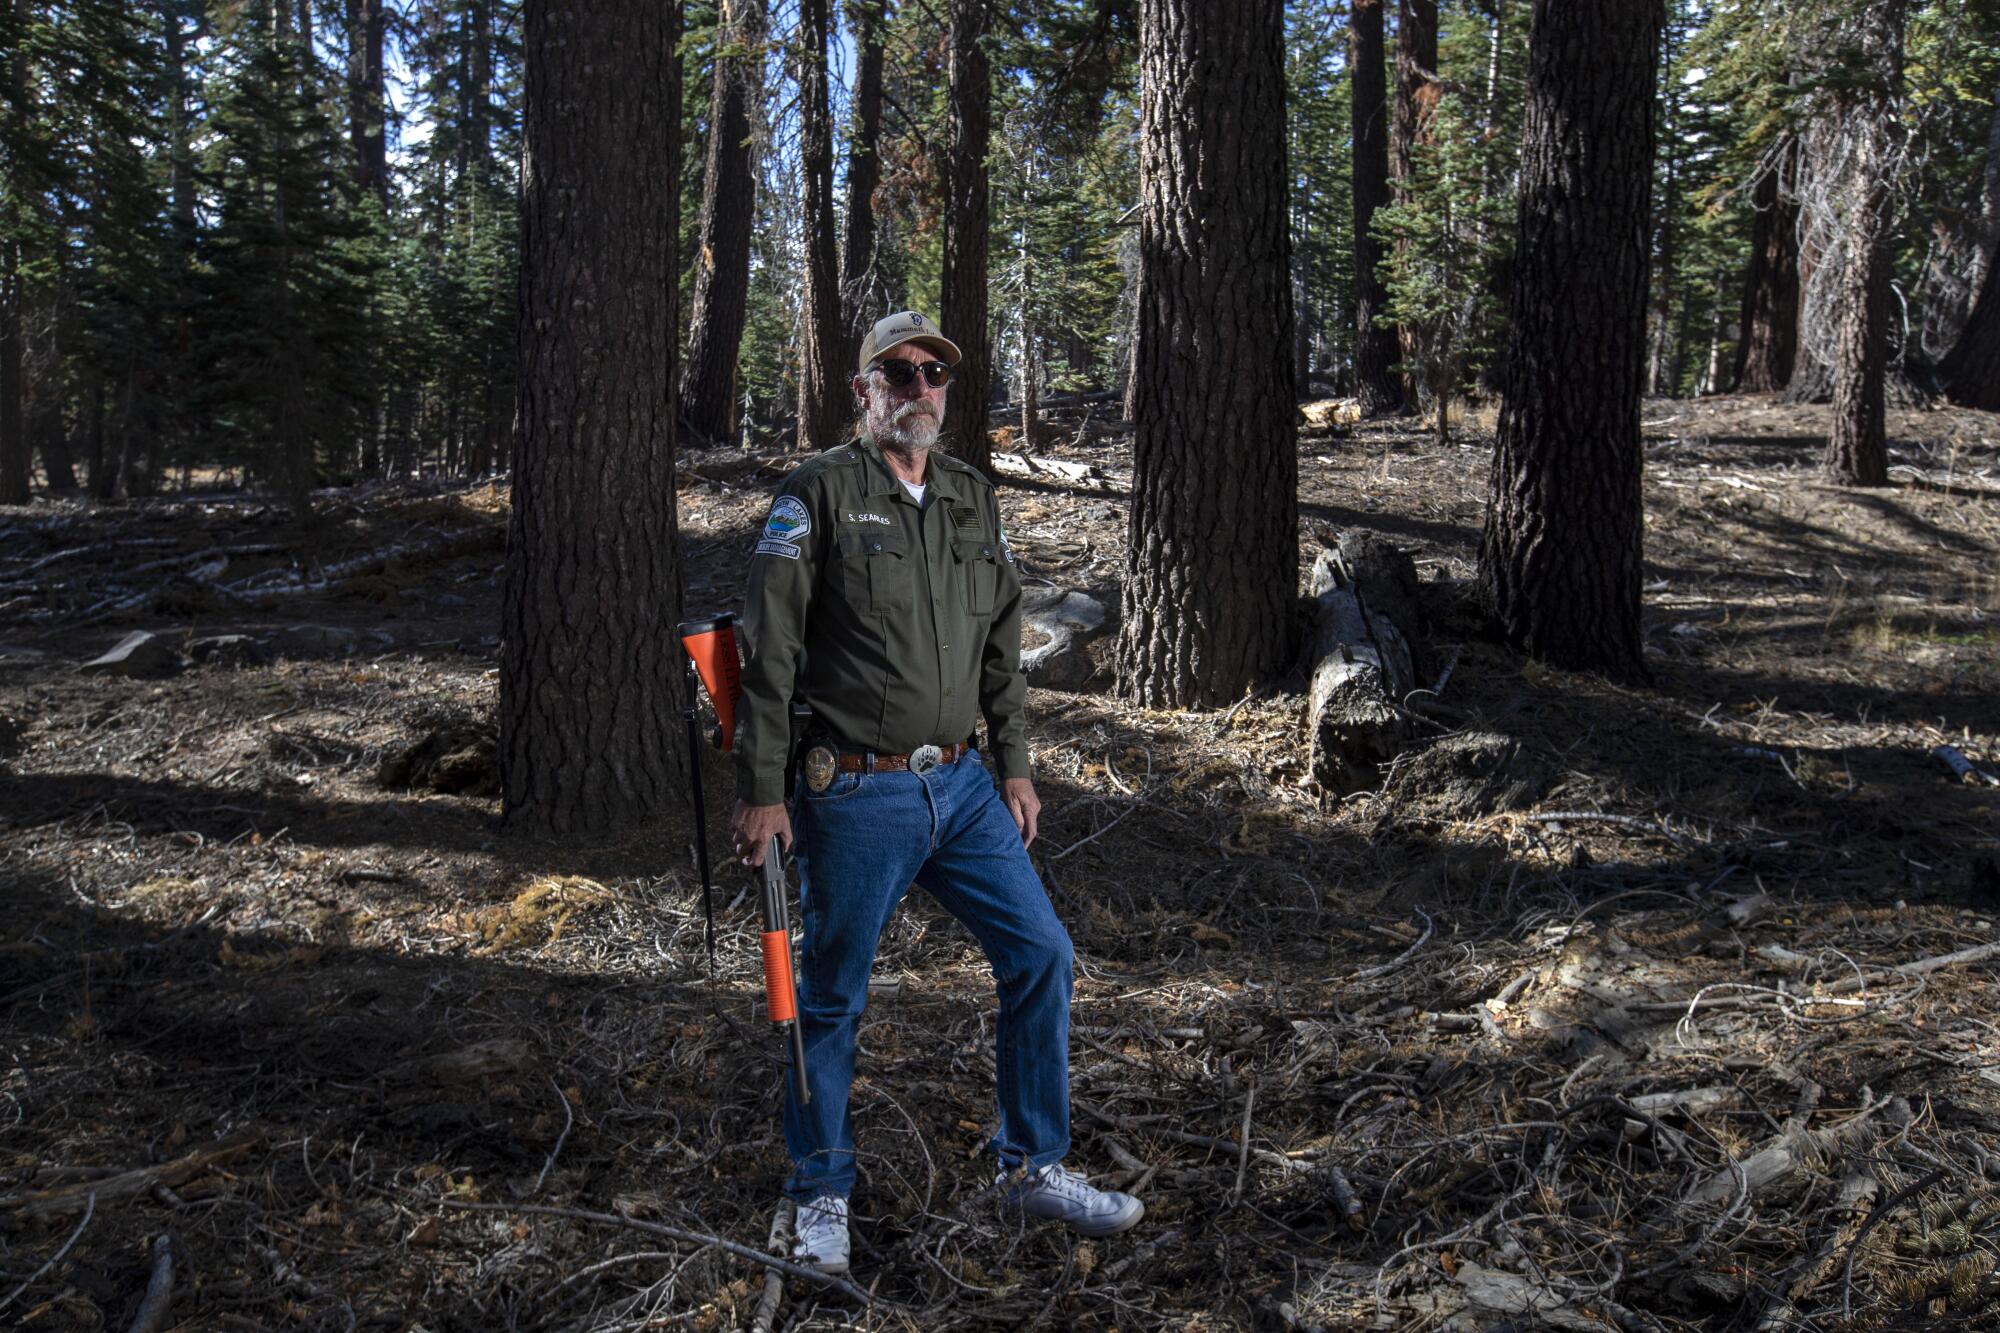 Wildlife specialist Steve Searles stands in a wooded area of Mammoth Lakes.